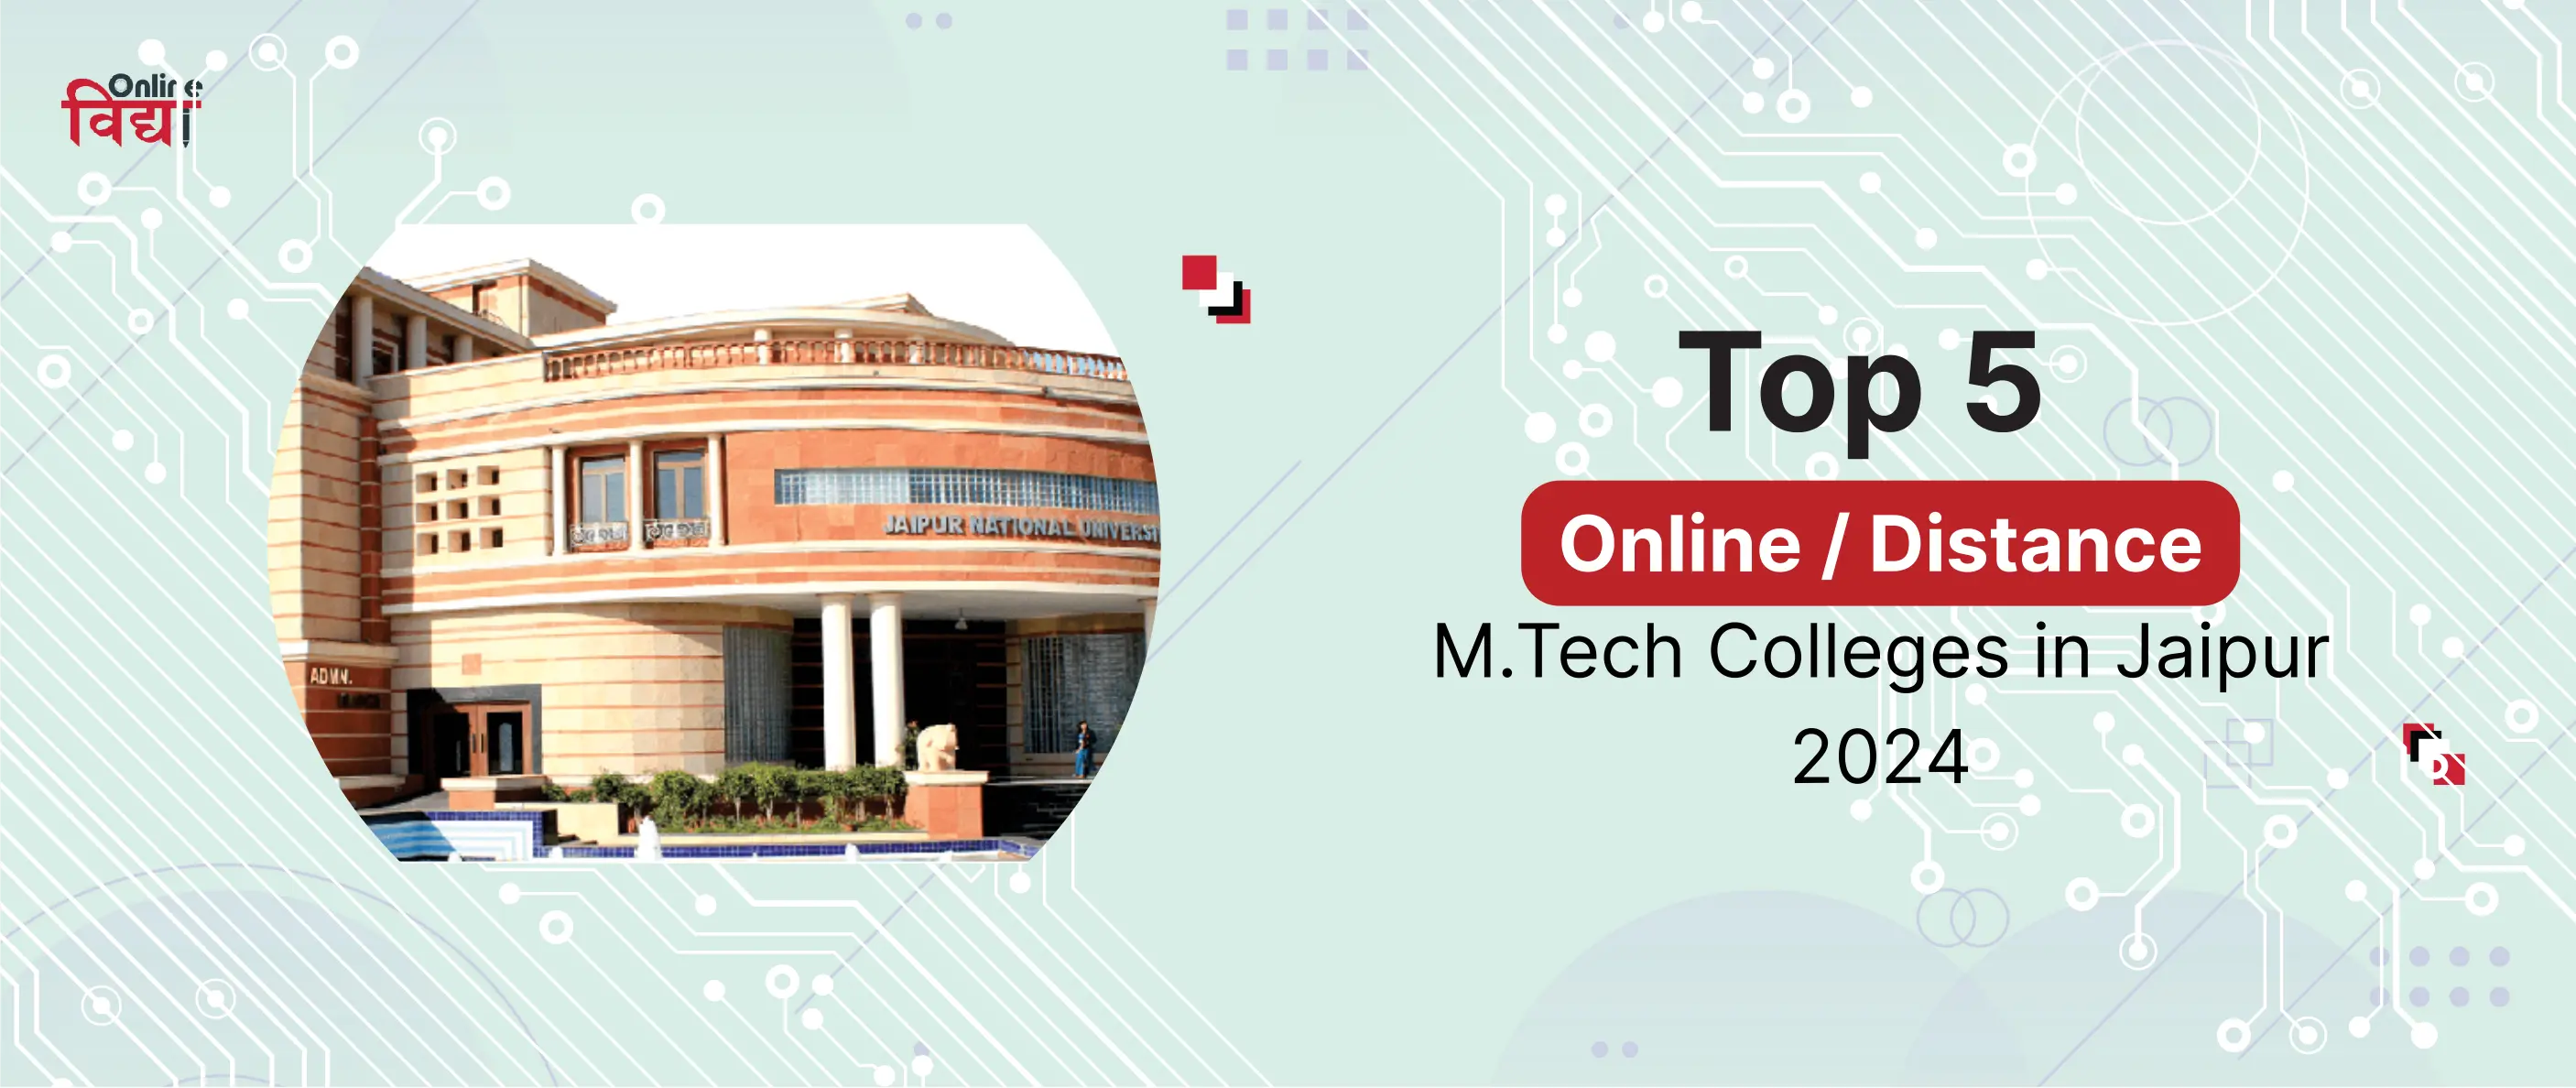 Top 5 Online/ Distance M.Tech Colleges in Jaipur 2024